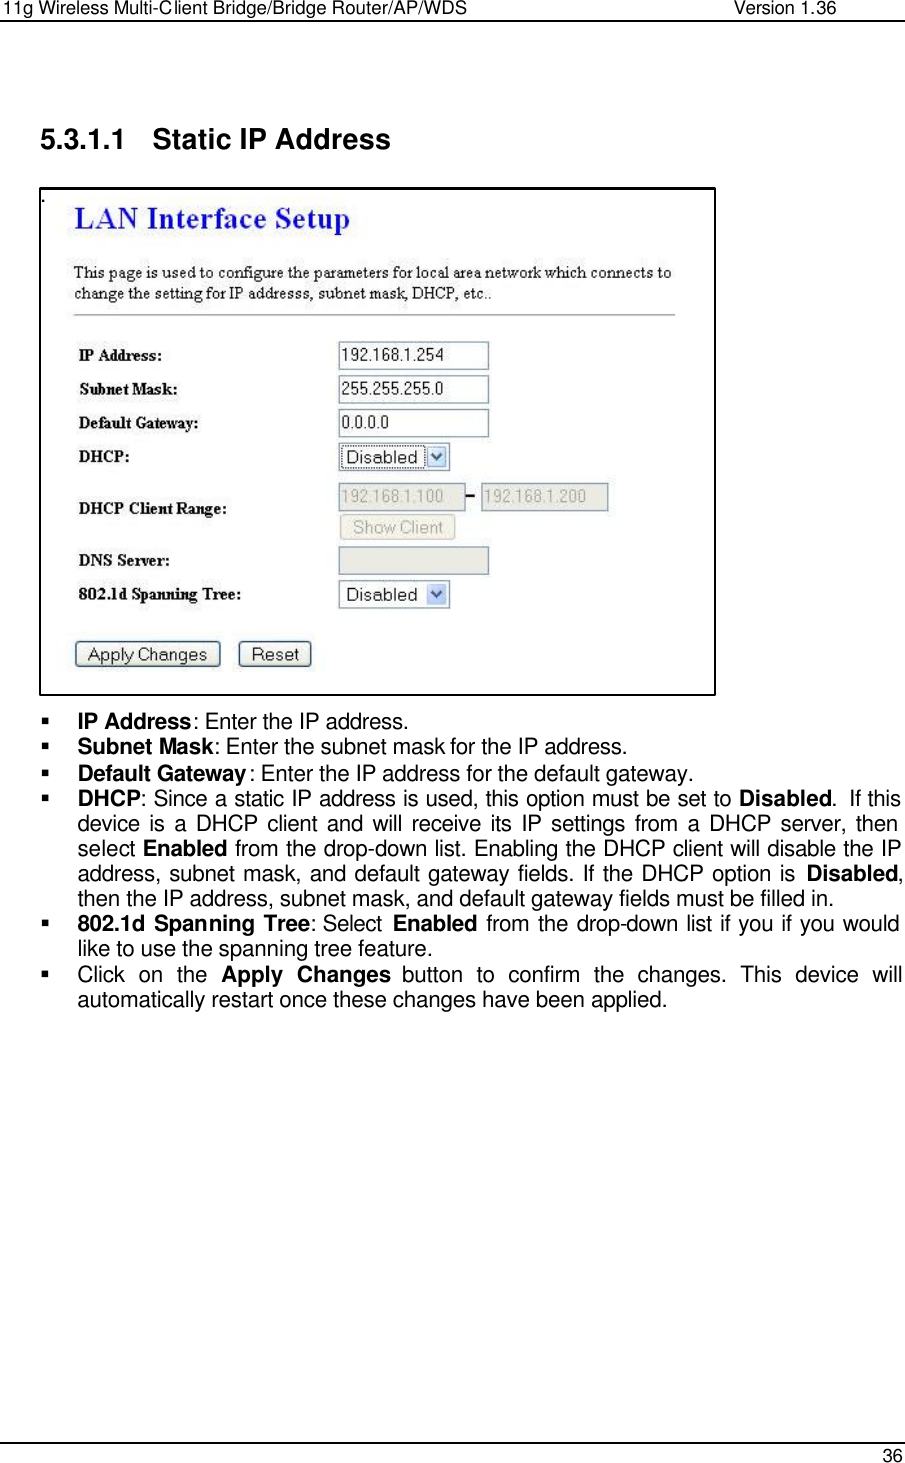 11g Wireless Multi-Client Bridge/Bridge Router/AP/WDS                                                   Version 1.36    36    5.3.1.1 Static IP Address .                     § IP Address: Enter the IP address. § Subnet Mask: Enter the subnet mask for the IP address. § Default Gateway: Enter the IP address for the default gateway. § DHCP: Since a static IP address is used, this option must be set to Disabled.  If this device is a DHCP client and will receive its IP settings from a DHCP server, then select Enabled from the drop-down list. Enabling the DHCP client will disable the IP address, subnet mask, and default gateway fields. If the DHCP option is Disabled, then the IP address, subnet mask, and default gateway fields must be filled in.   § 802.1d Spanning Tree: Select  Enabled from the drop-down list if you if you would like to use the spanning tree feature.  § Click on the Apply Changes button to confirm the changes. This device will automatically restart once these changes have been applied.                